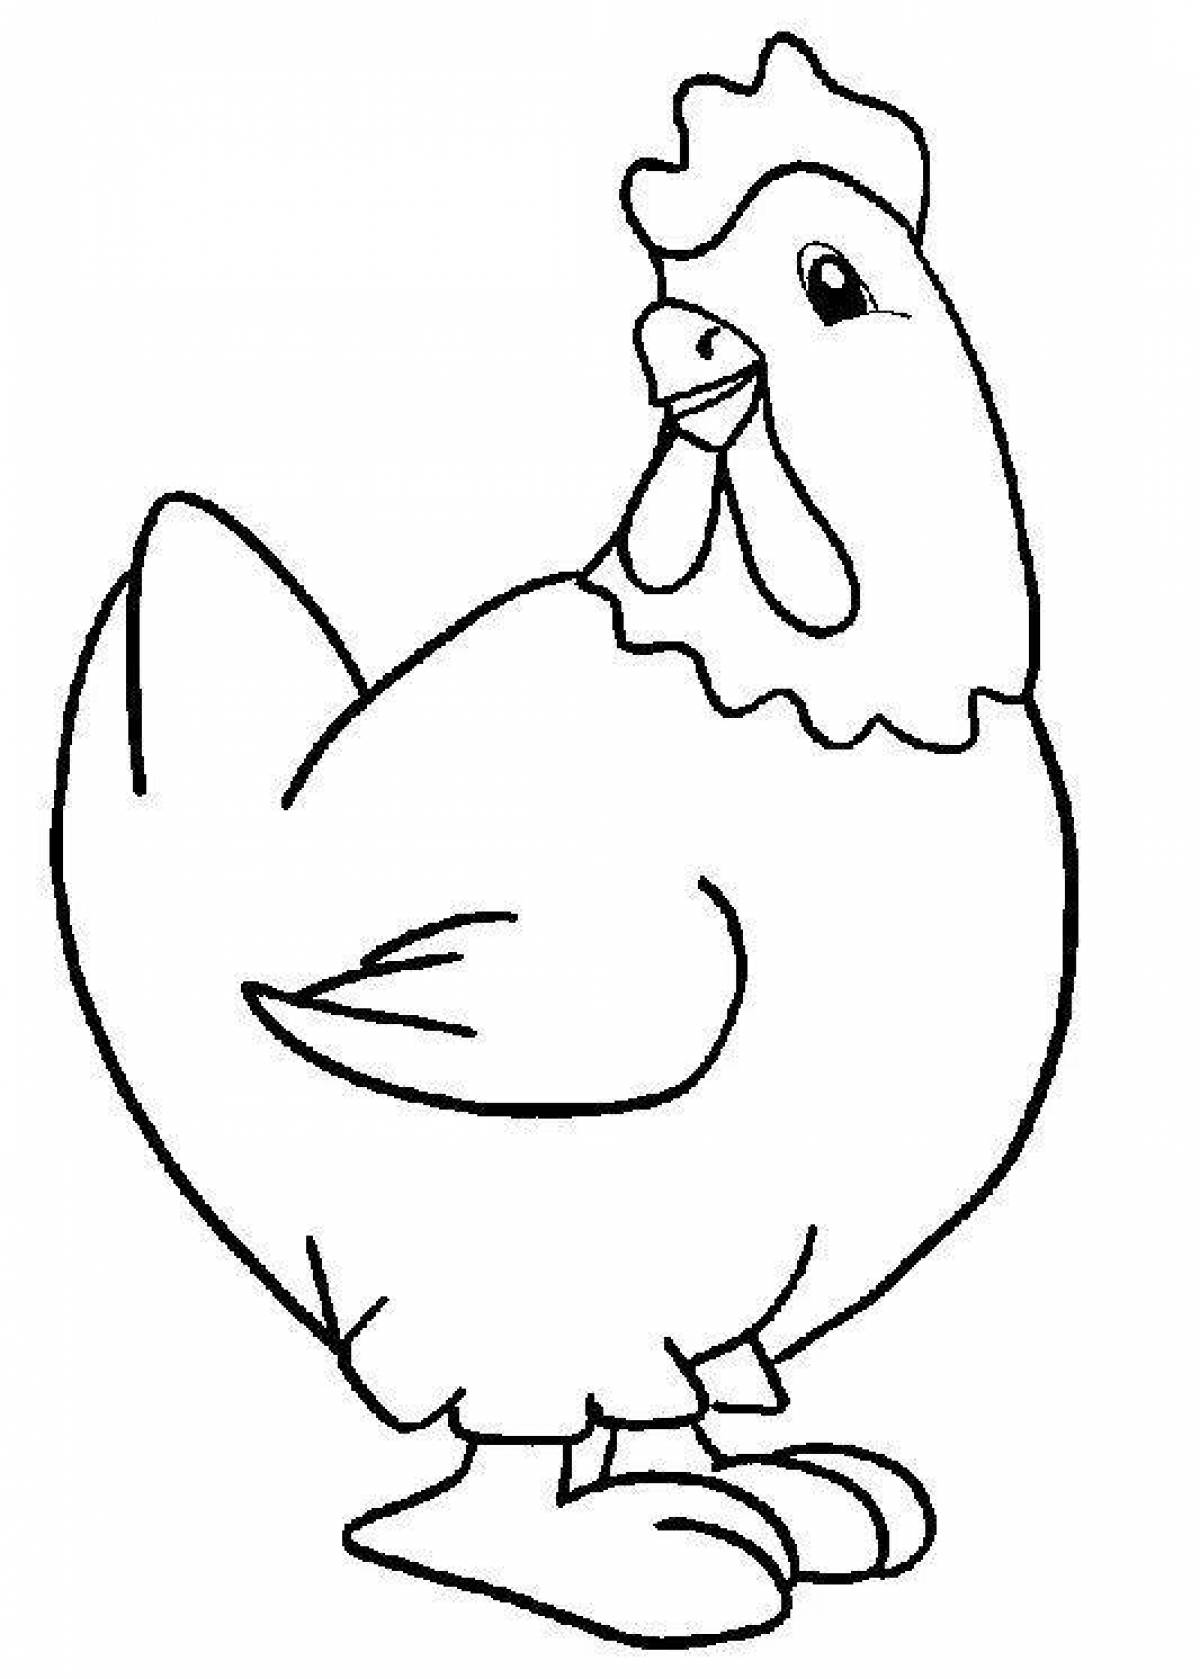 Coloring page with cute chickens